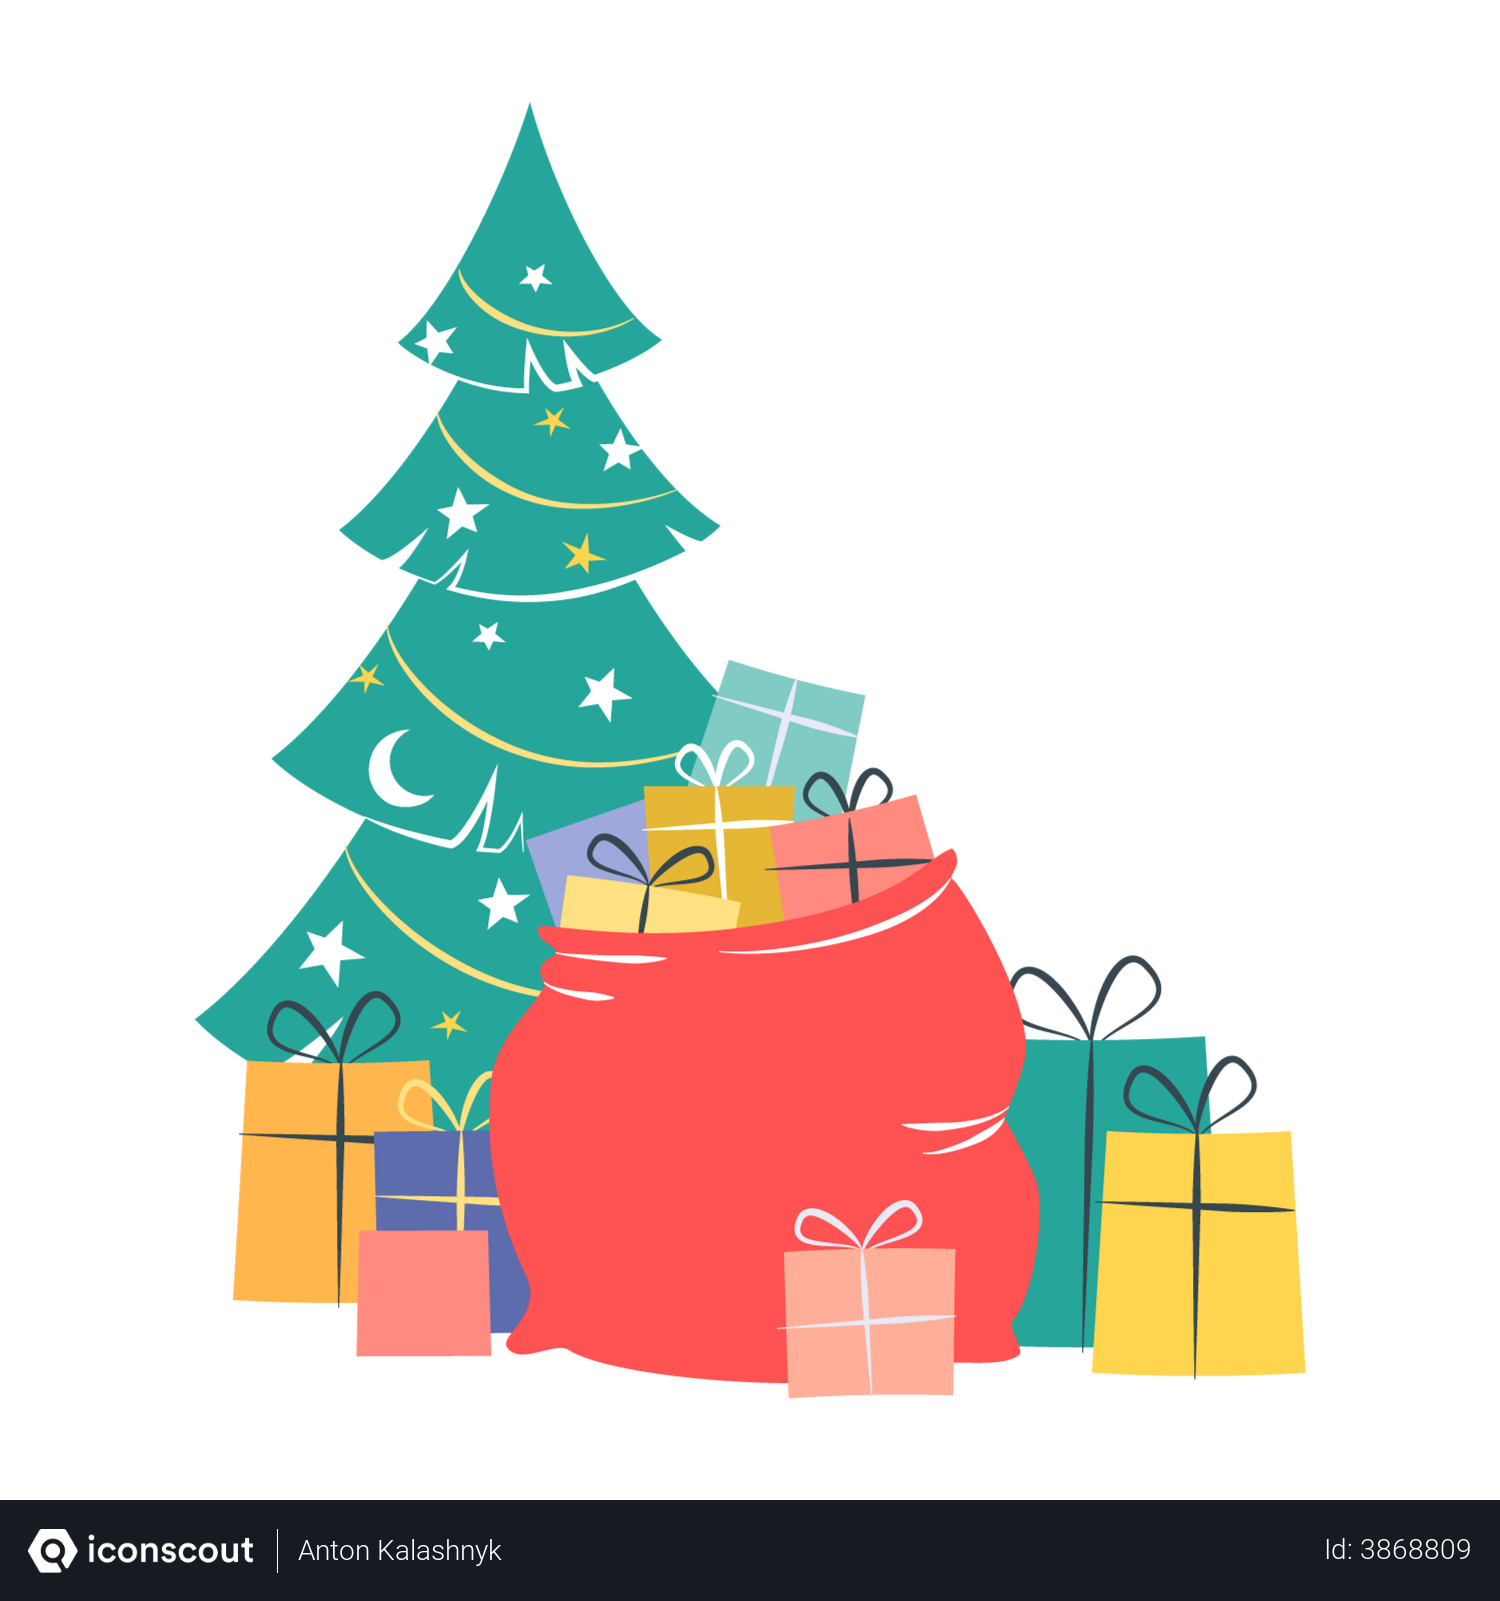 Presents under the tree | Christmas tree with presents, Christmas tree  goals, Christmas present sets